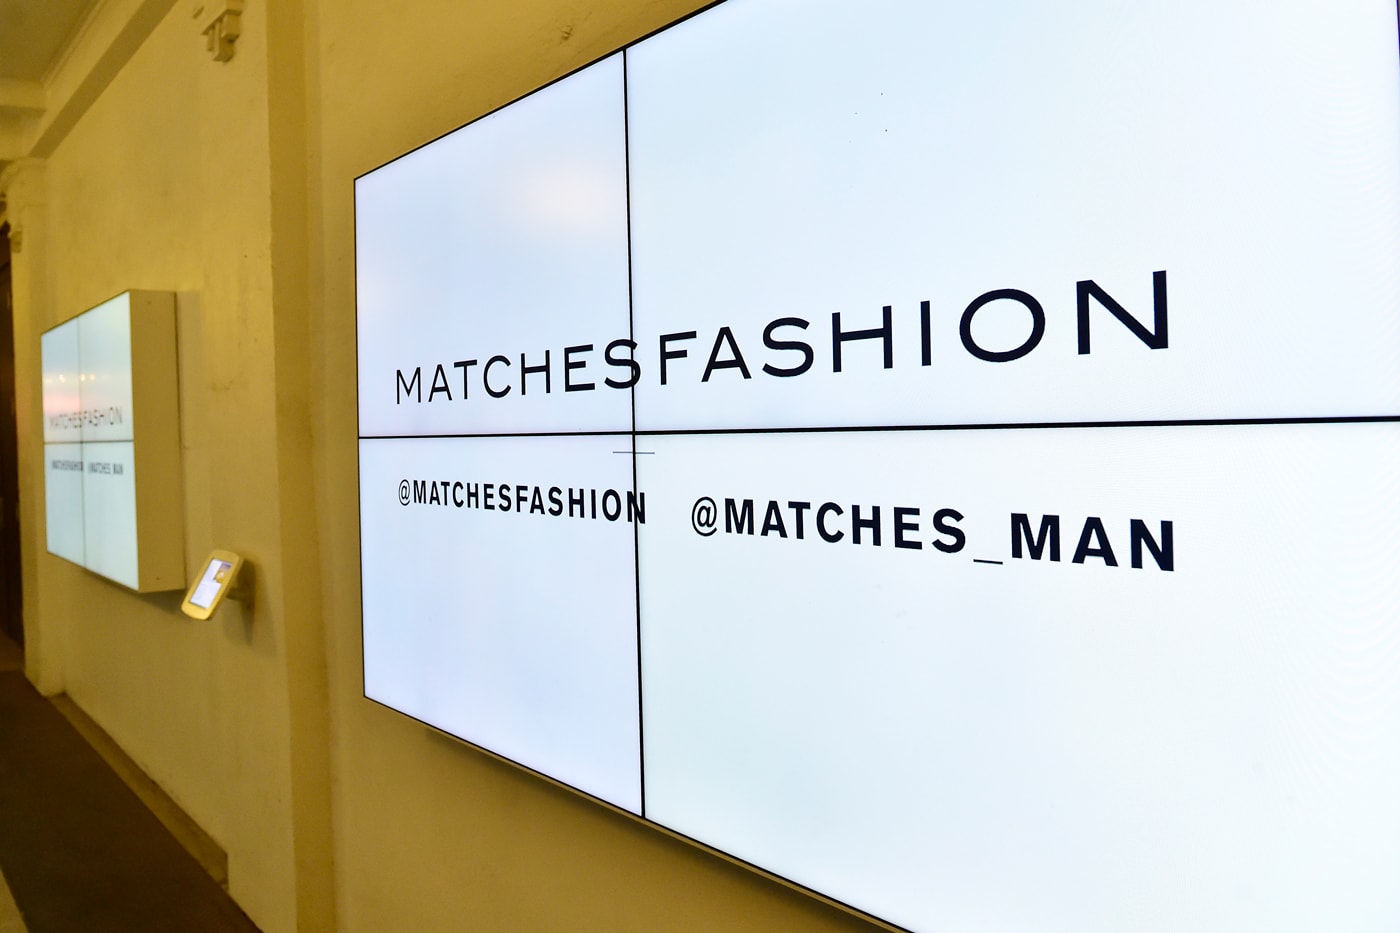 Fraser Group Shutters Matchesfashion E-commerce luxury sector website business acquisition farfetch net a porter